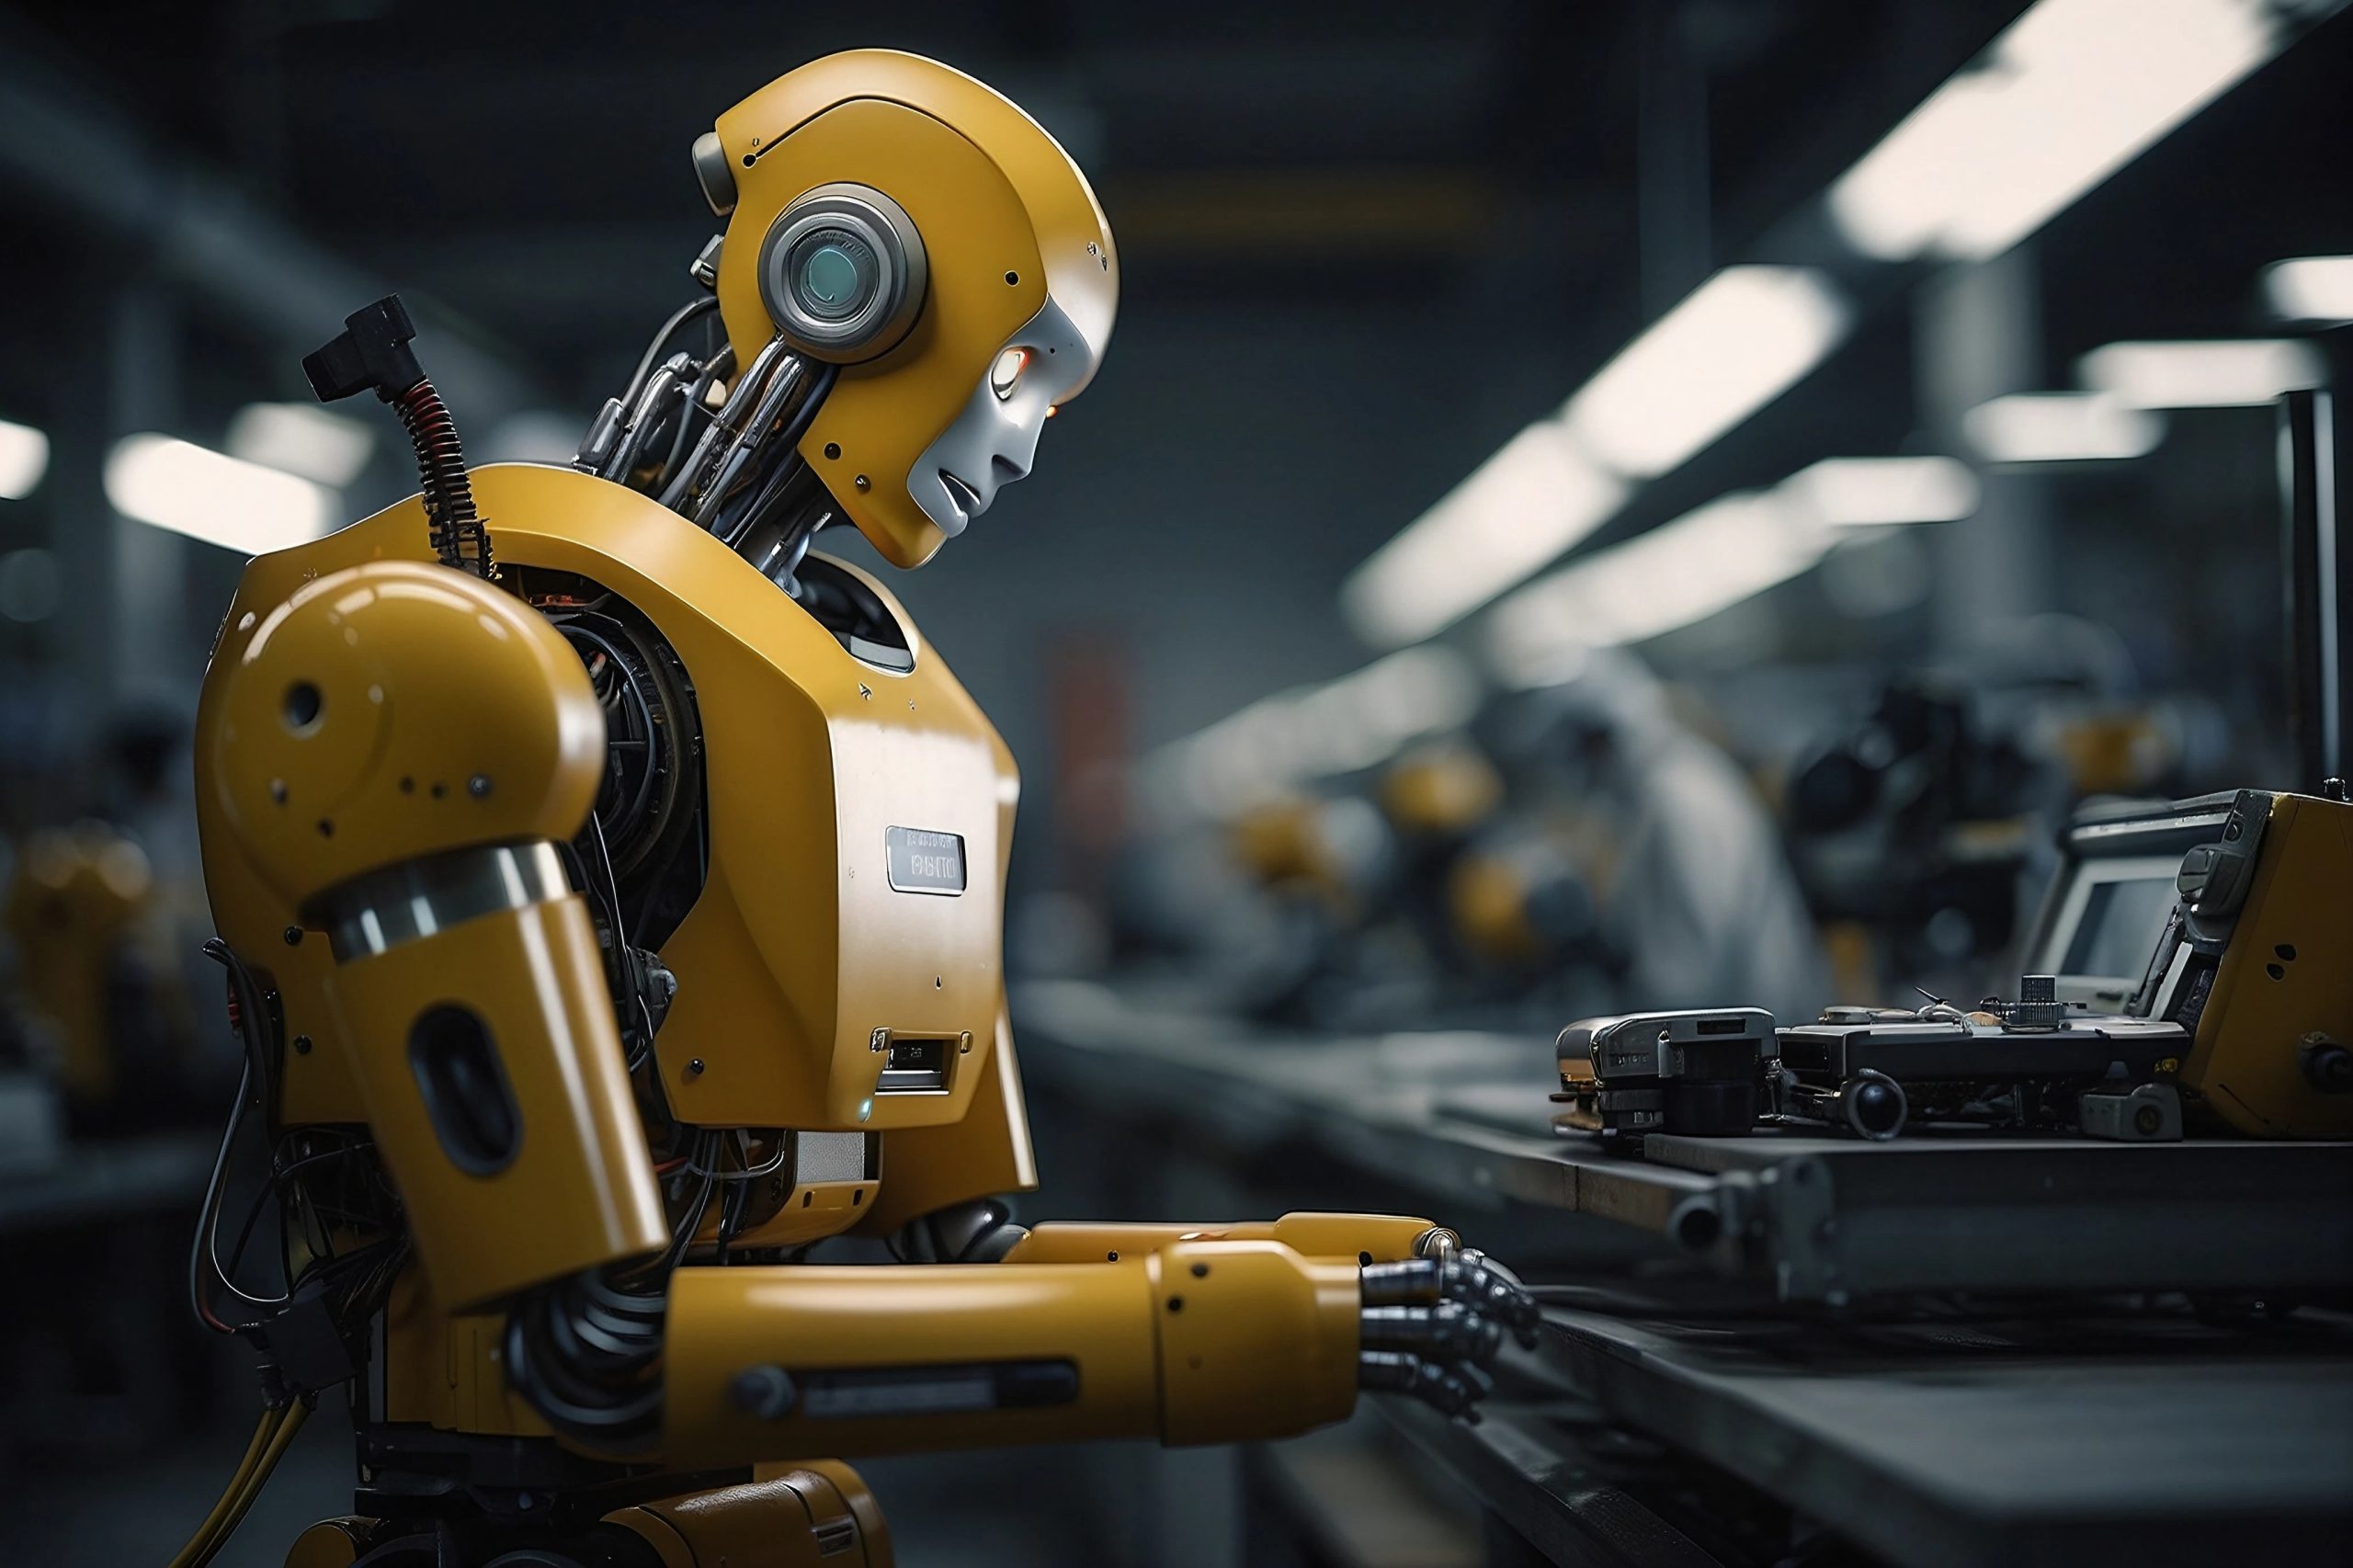 Industrial robot assembly line in factory. Smart industry 4.0 concept